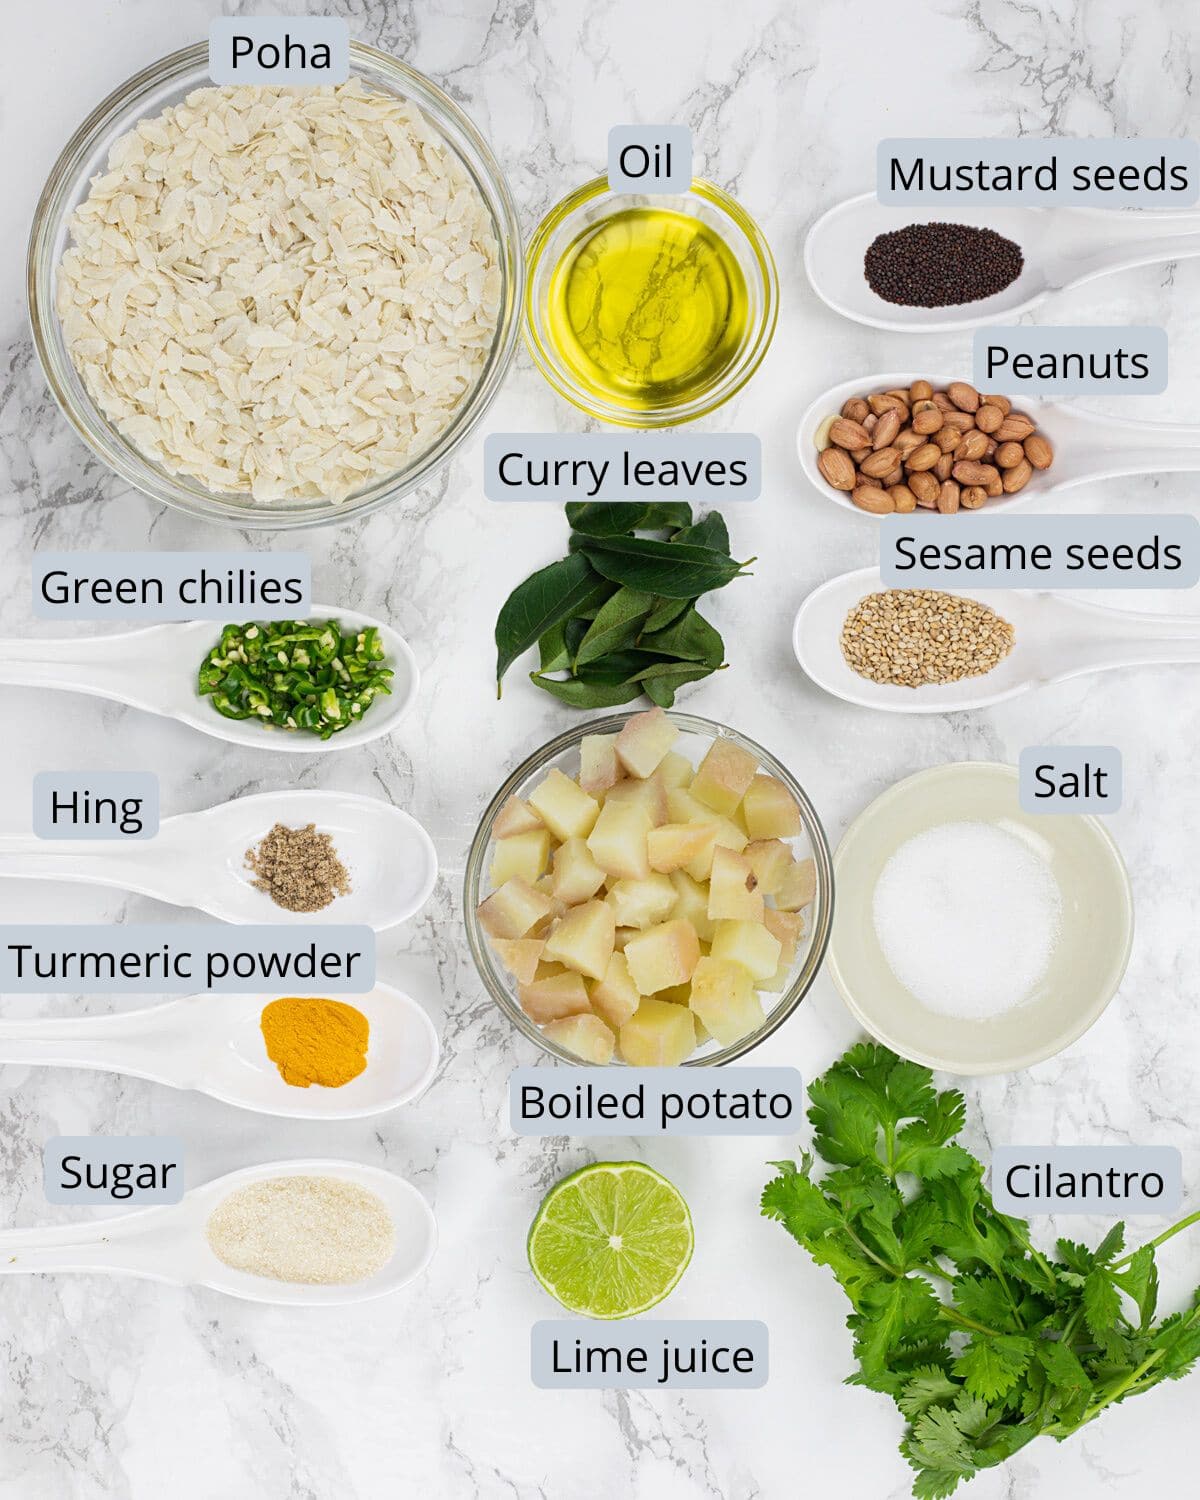 Poha recipe ingredients in bowls and spoons with labels.